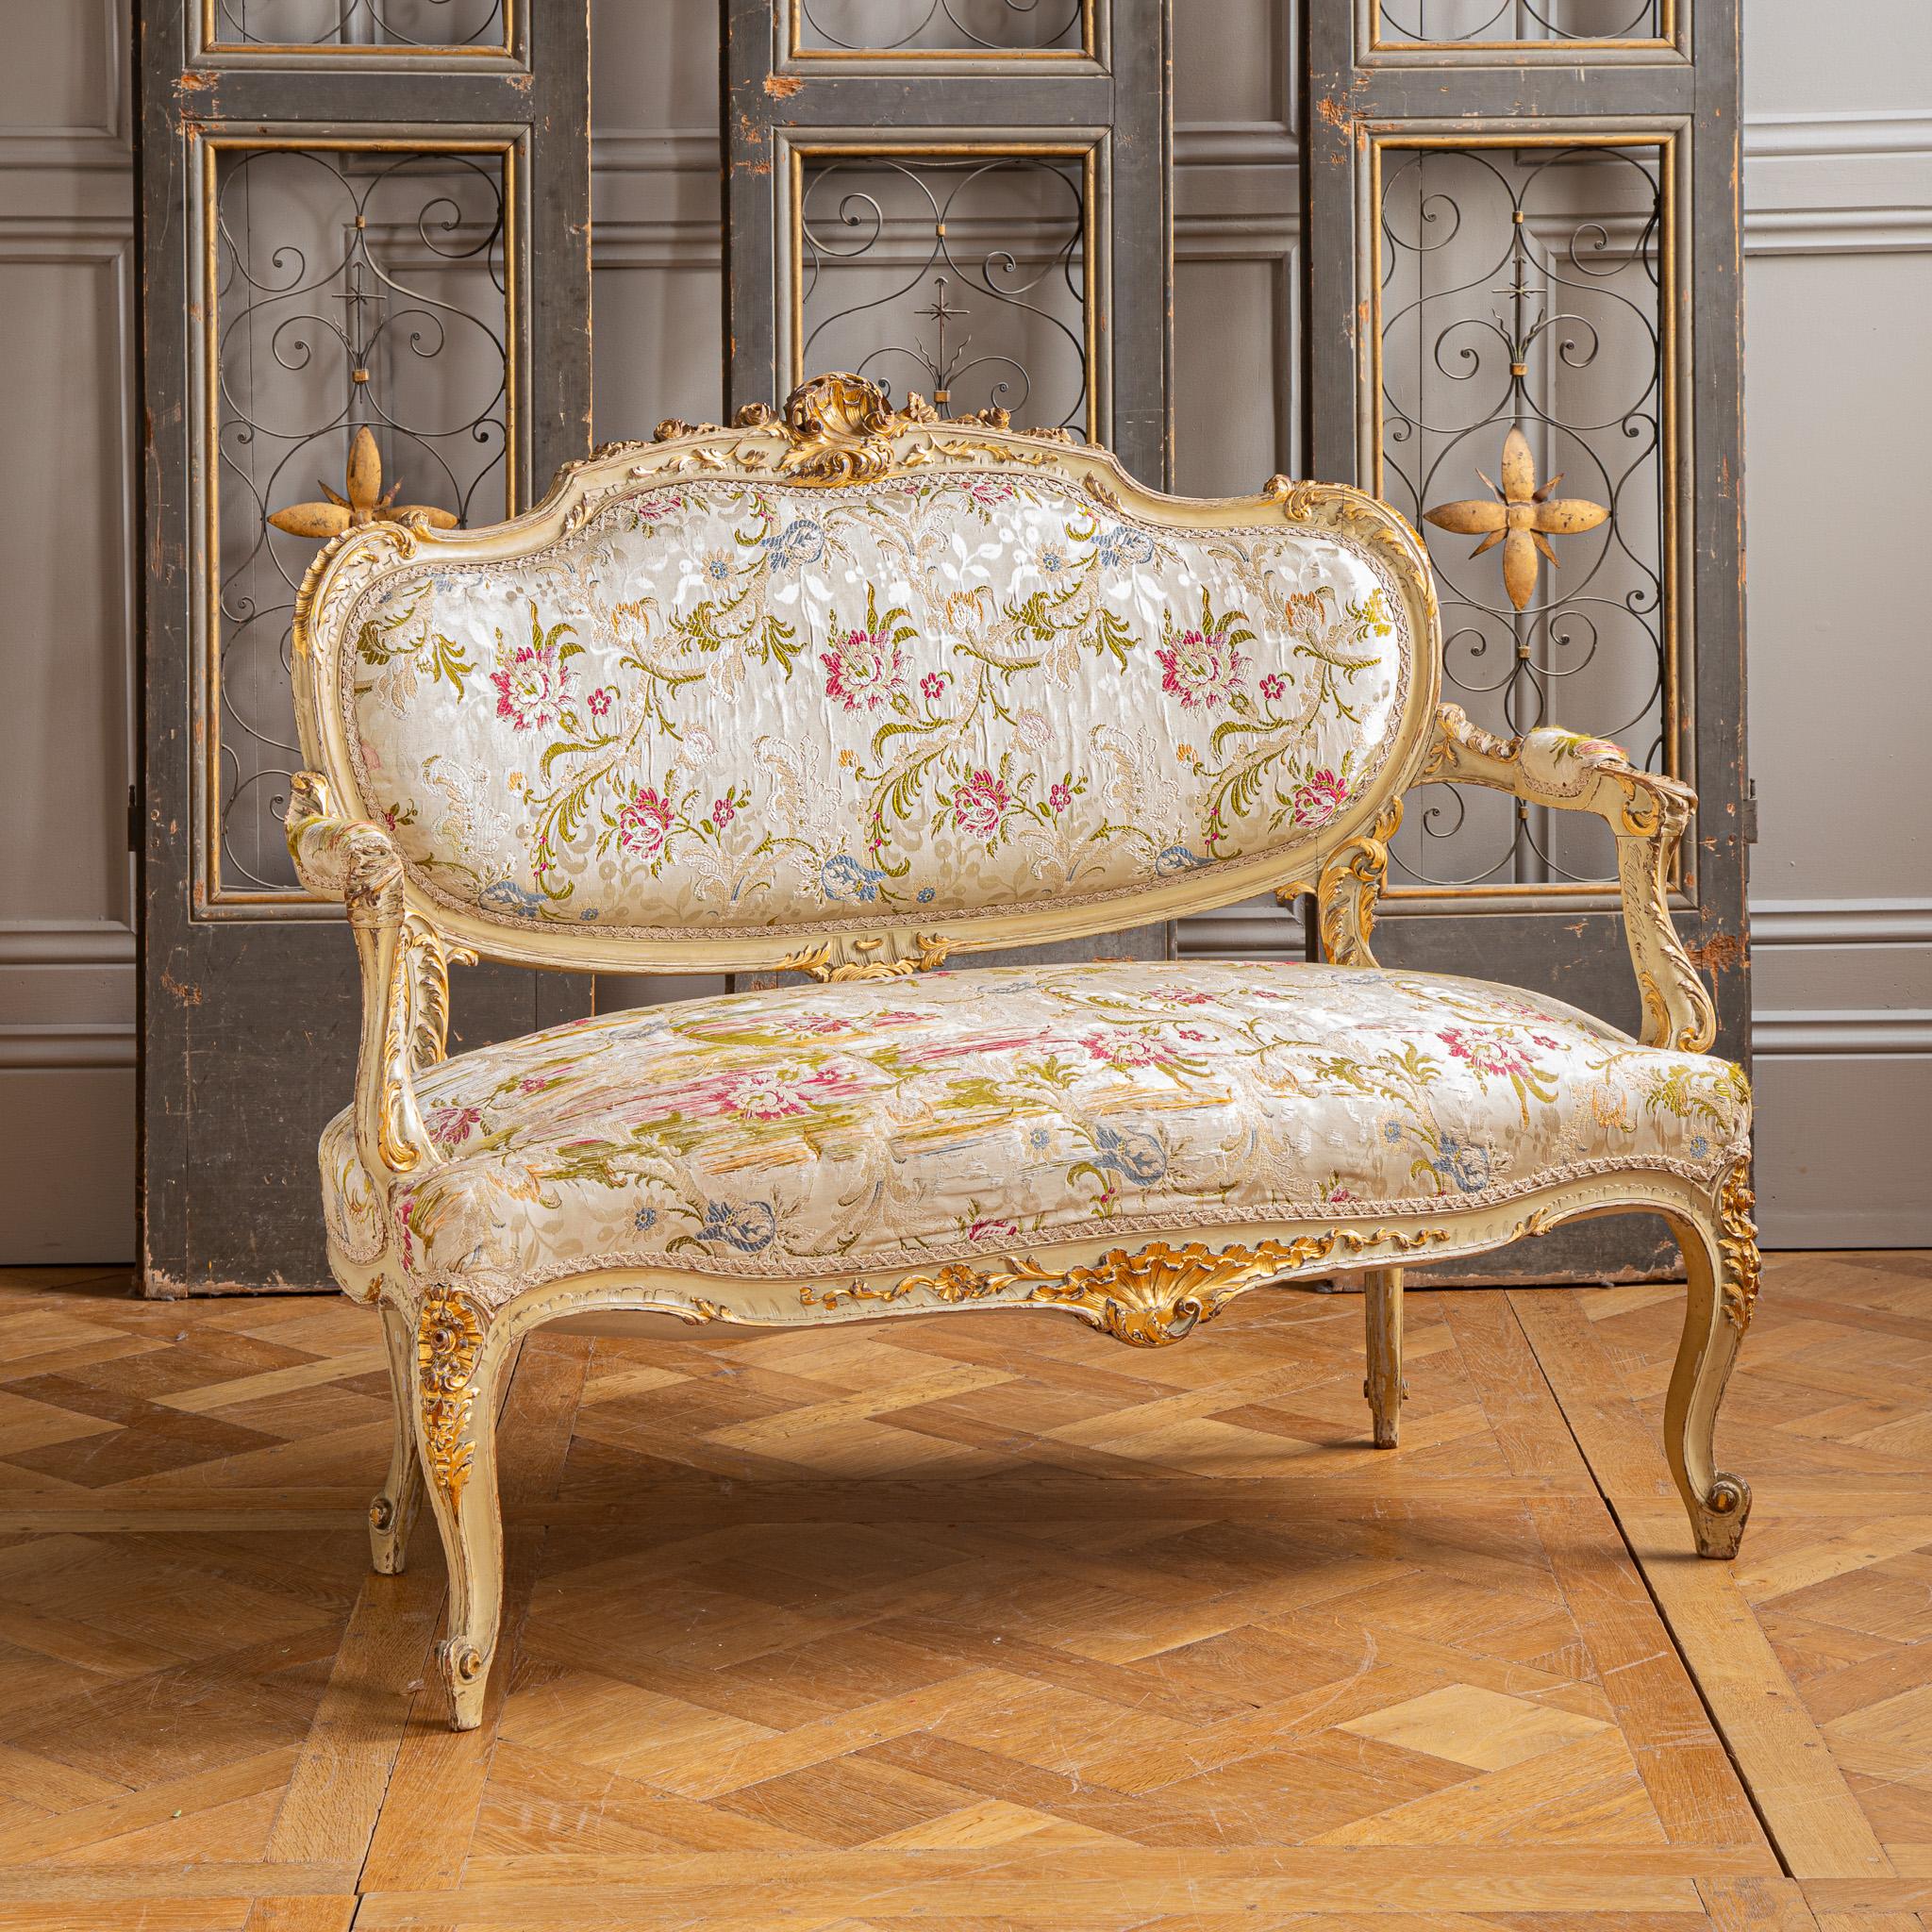 Louis XV 19th Century Italian Carved Gilt-wood Salon Suite - Sofa, Chairs & Footstools  For Sale